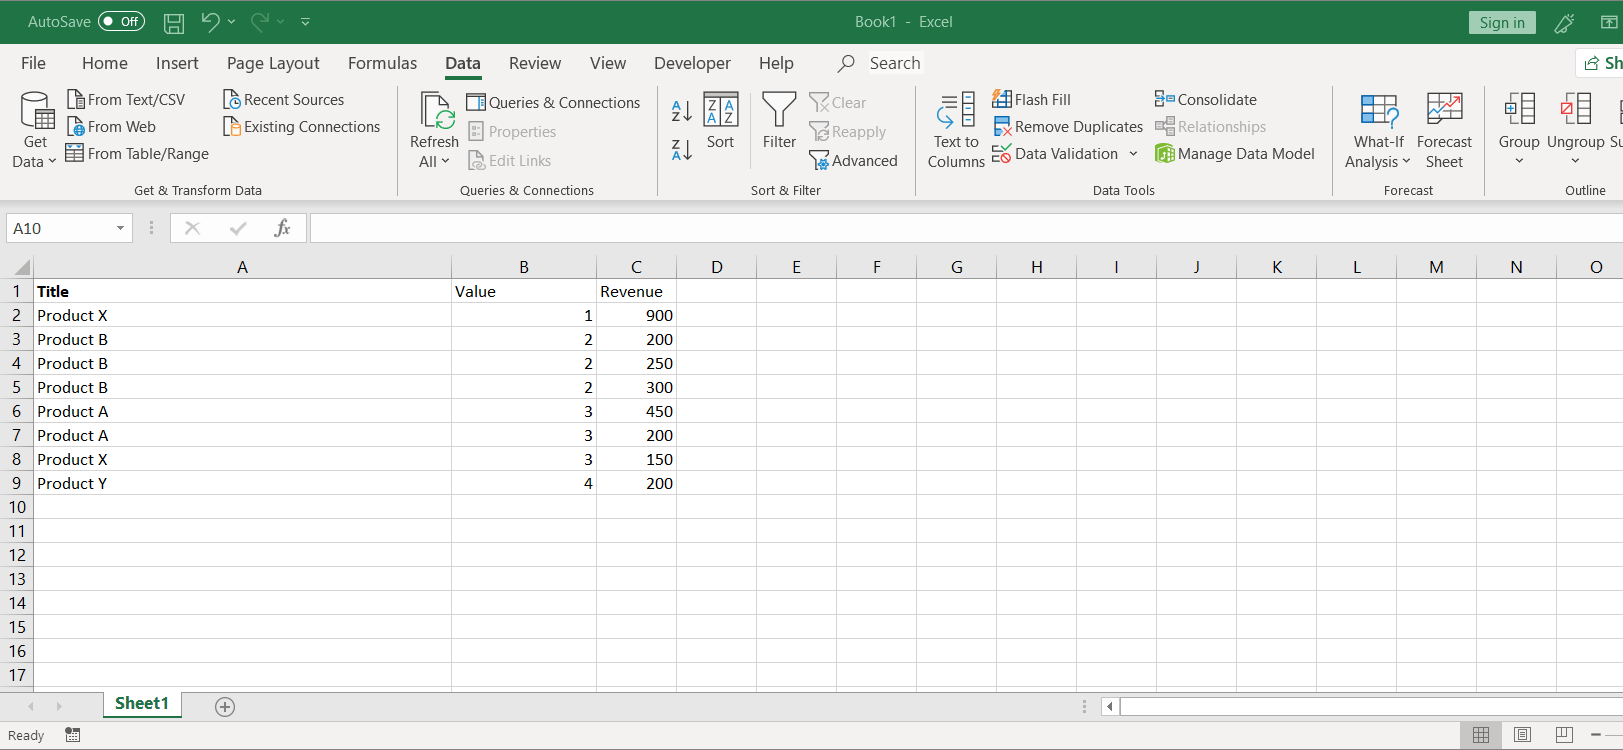 How to Remove Duplicates in Excel spreadsheet